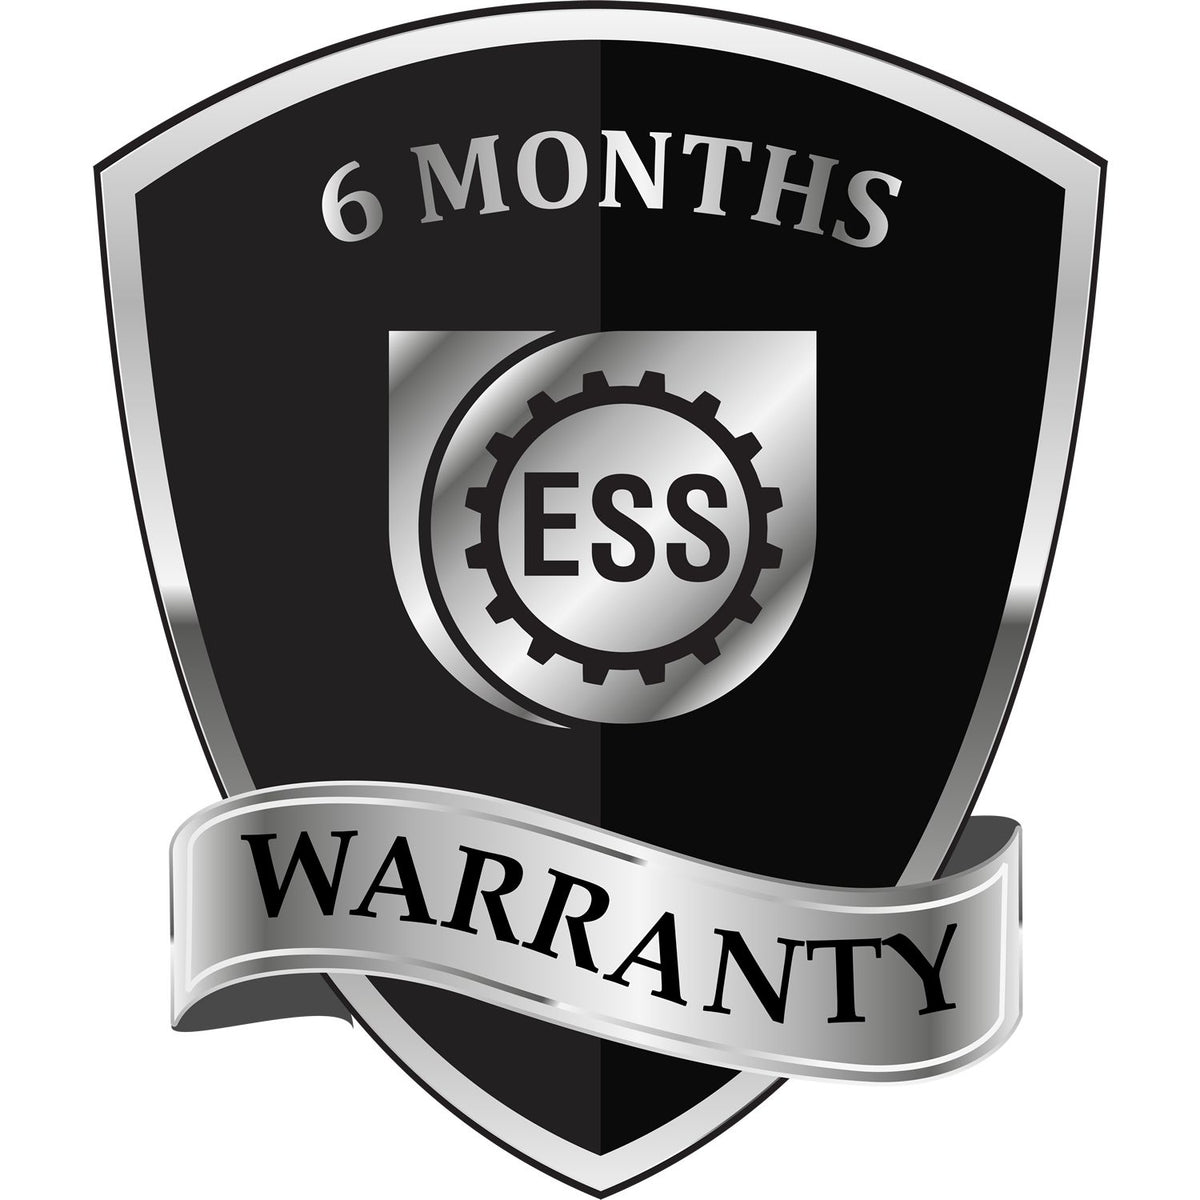 A badge or emblem showing a warranty icon for the PSI Guam Notary Stamp